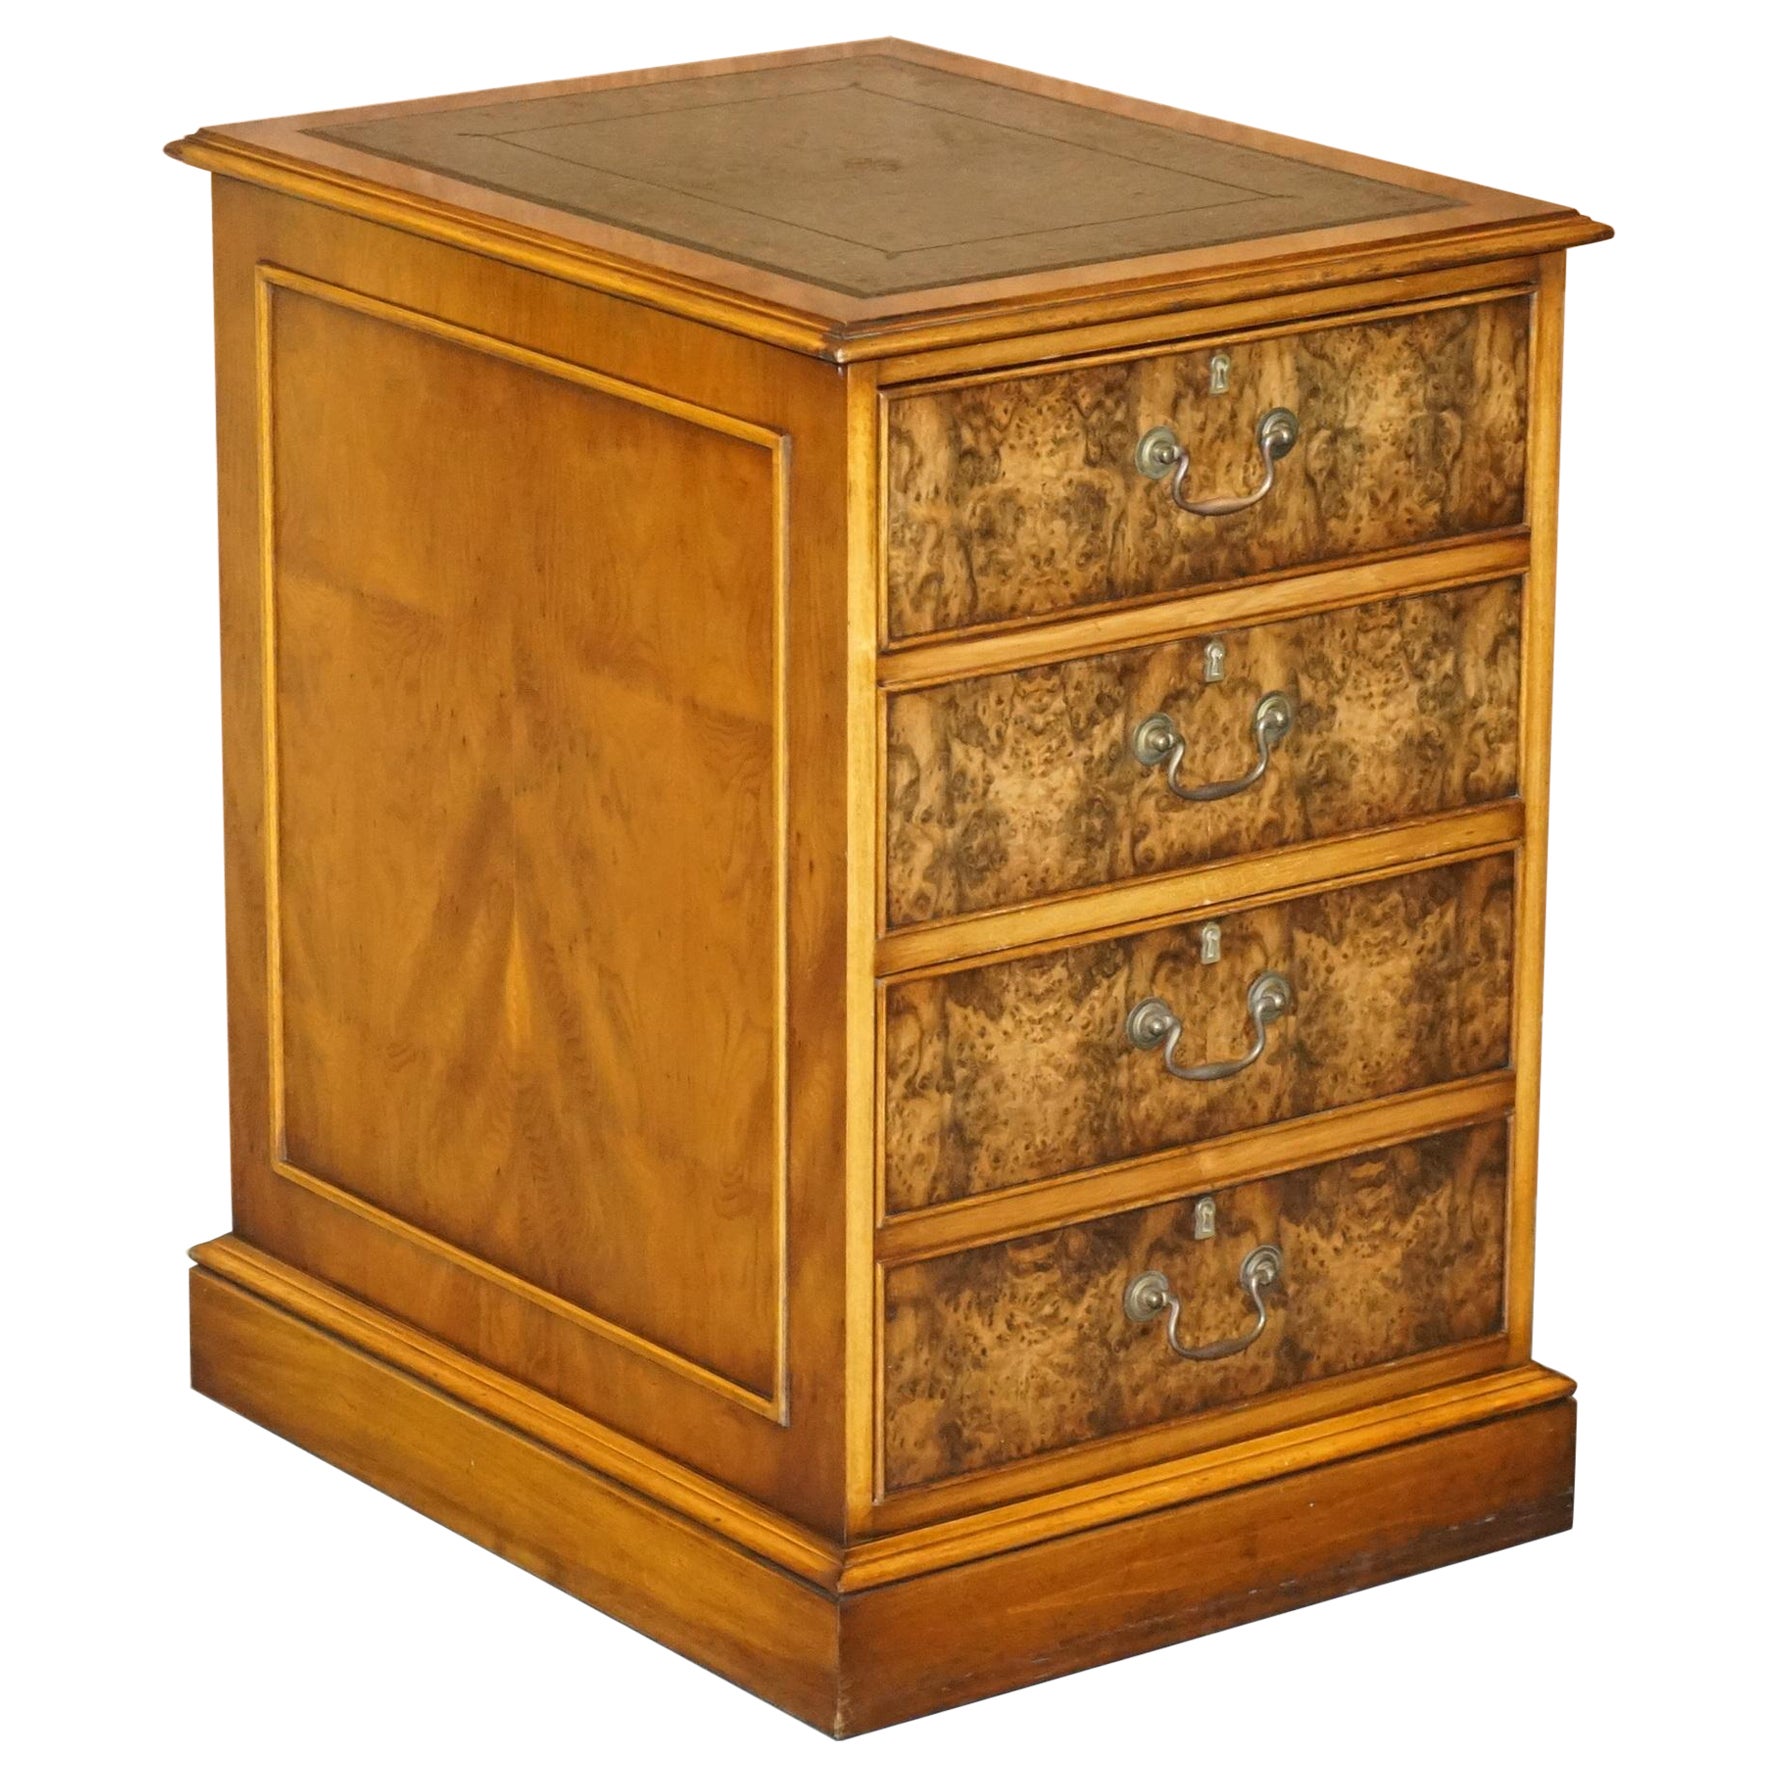 Stunning Burr Walnut Office Filing Cabinet with Nice Green Gold Leaf Leather Top